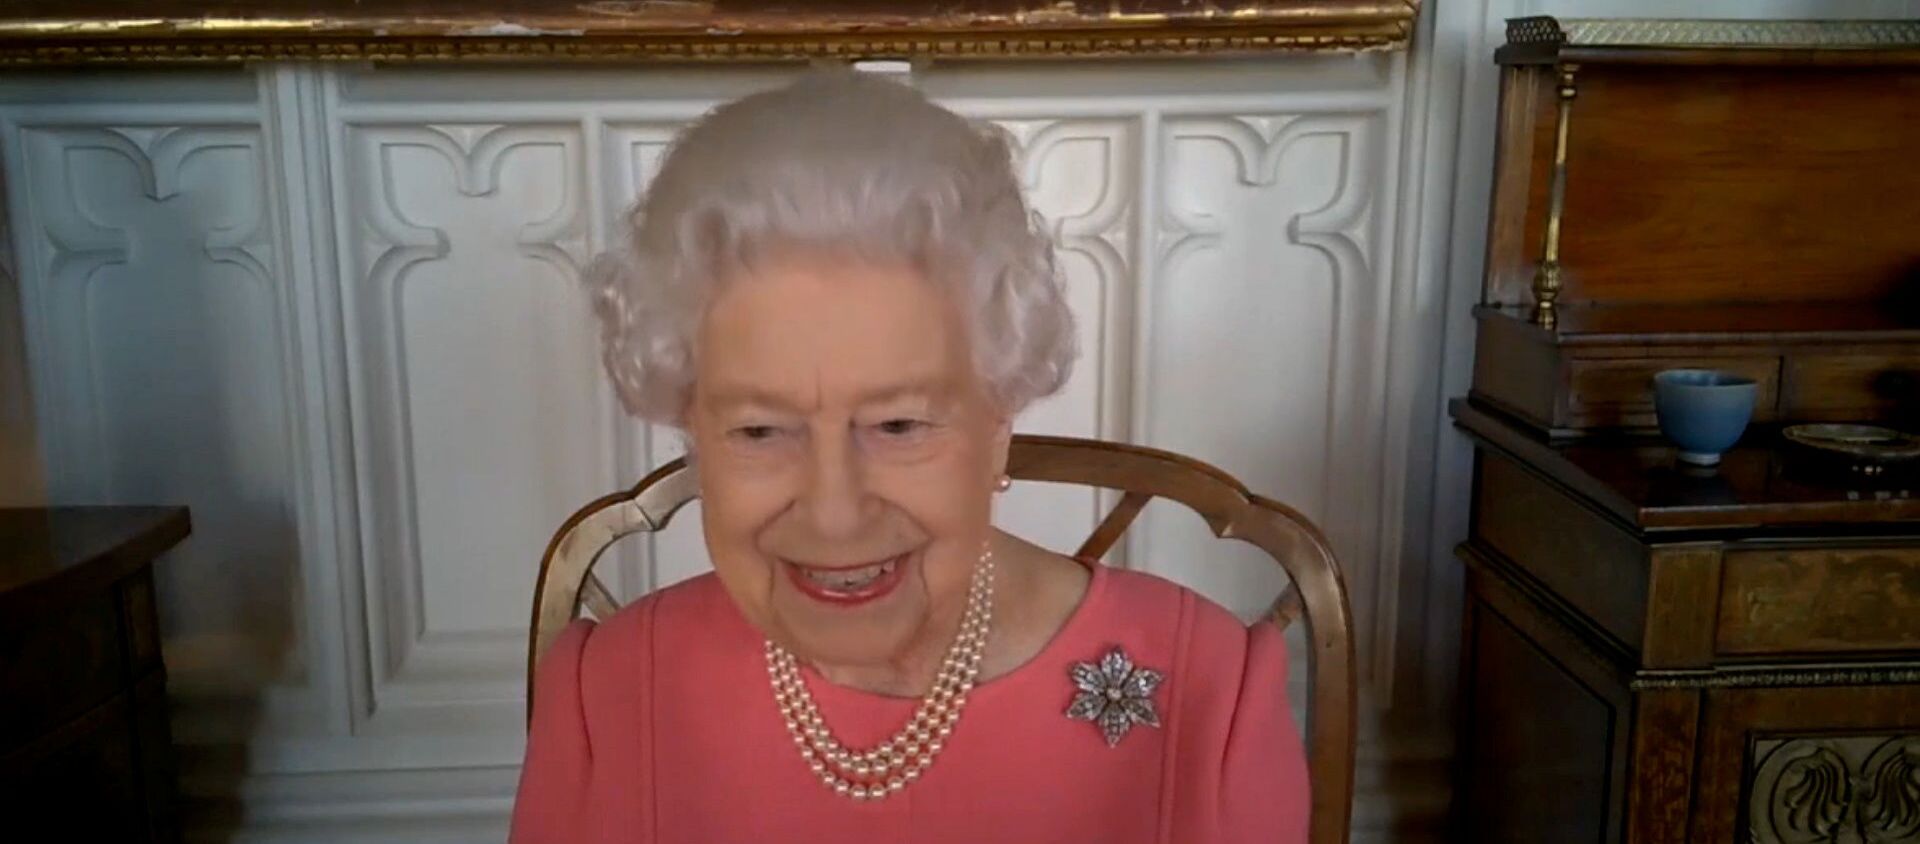 Britain's Queen Elizabeth speaks via video call to health leaders delivering the COVID-19 vaccine across England, Scotland, Wales and Northern Ireland, London, Britain February 25, 2021 - Sputnik International, 1920, 26.02.2021